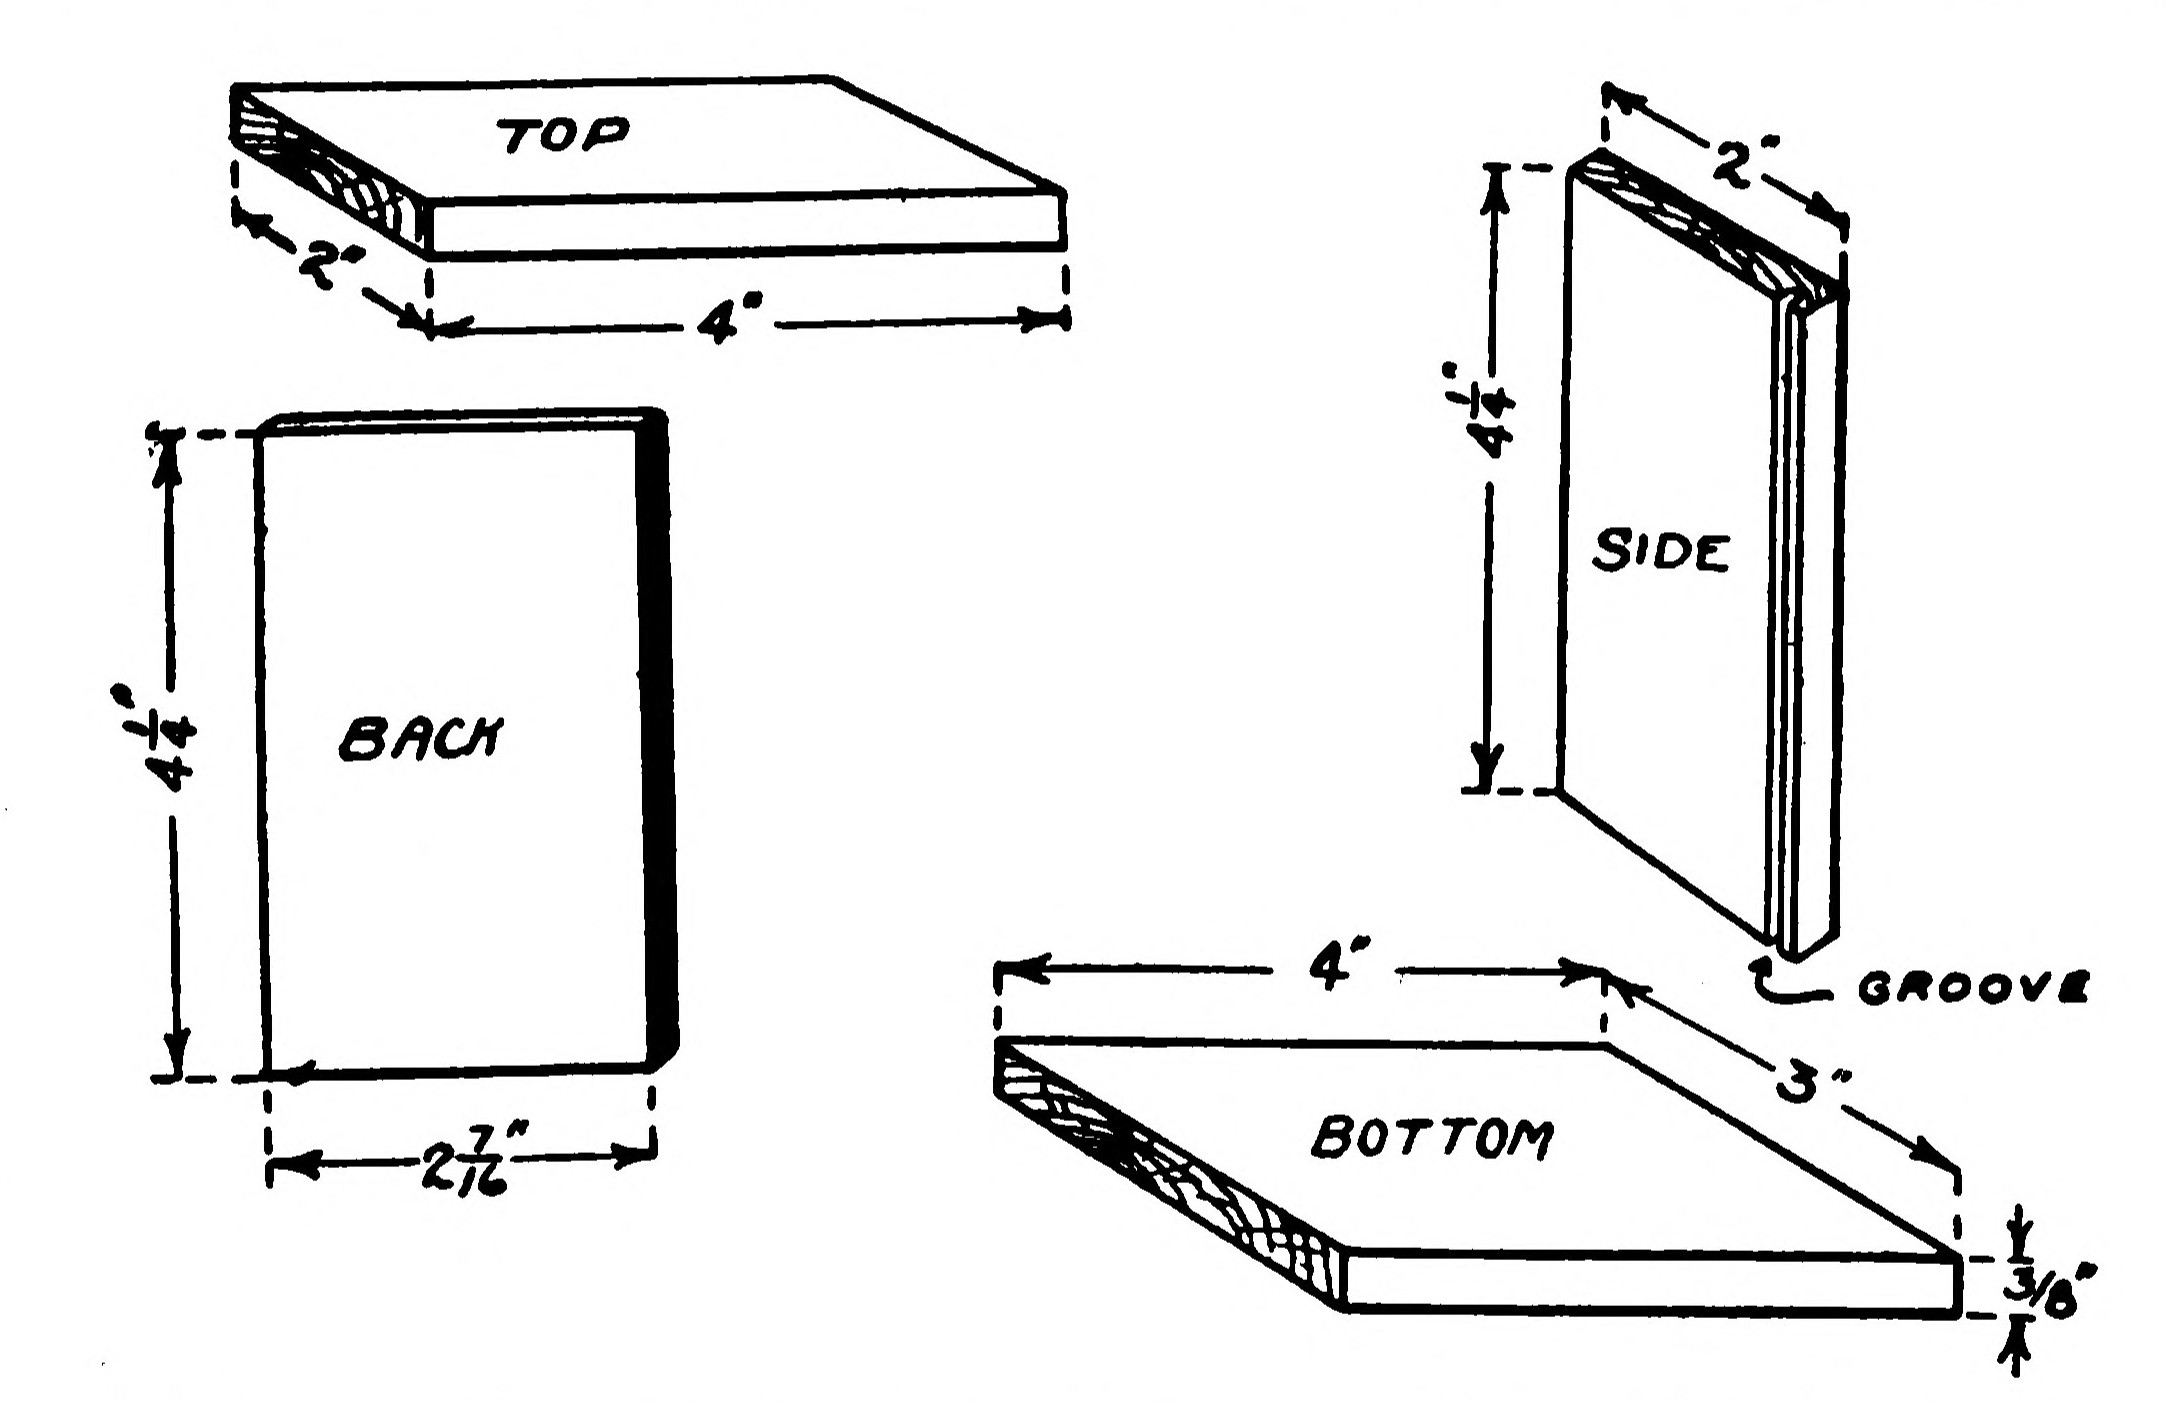 FIG. 73.—Details of the Wooden Parts which form the Case.